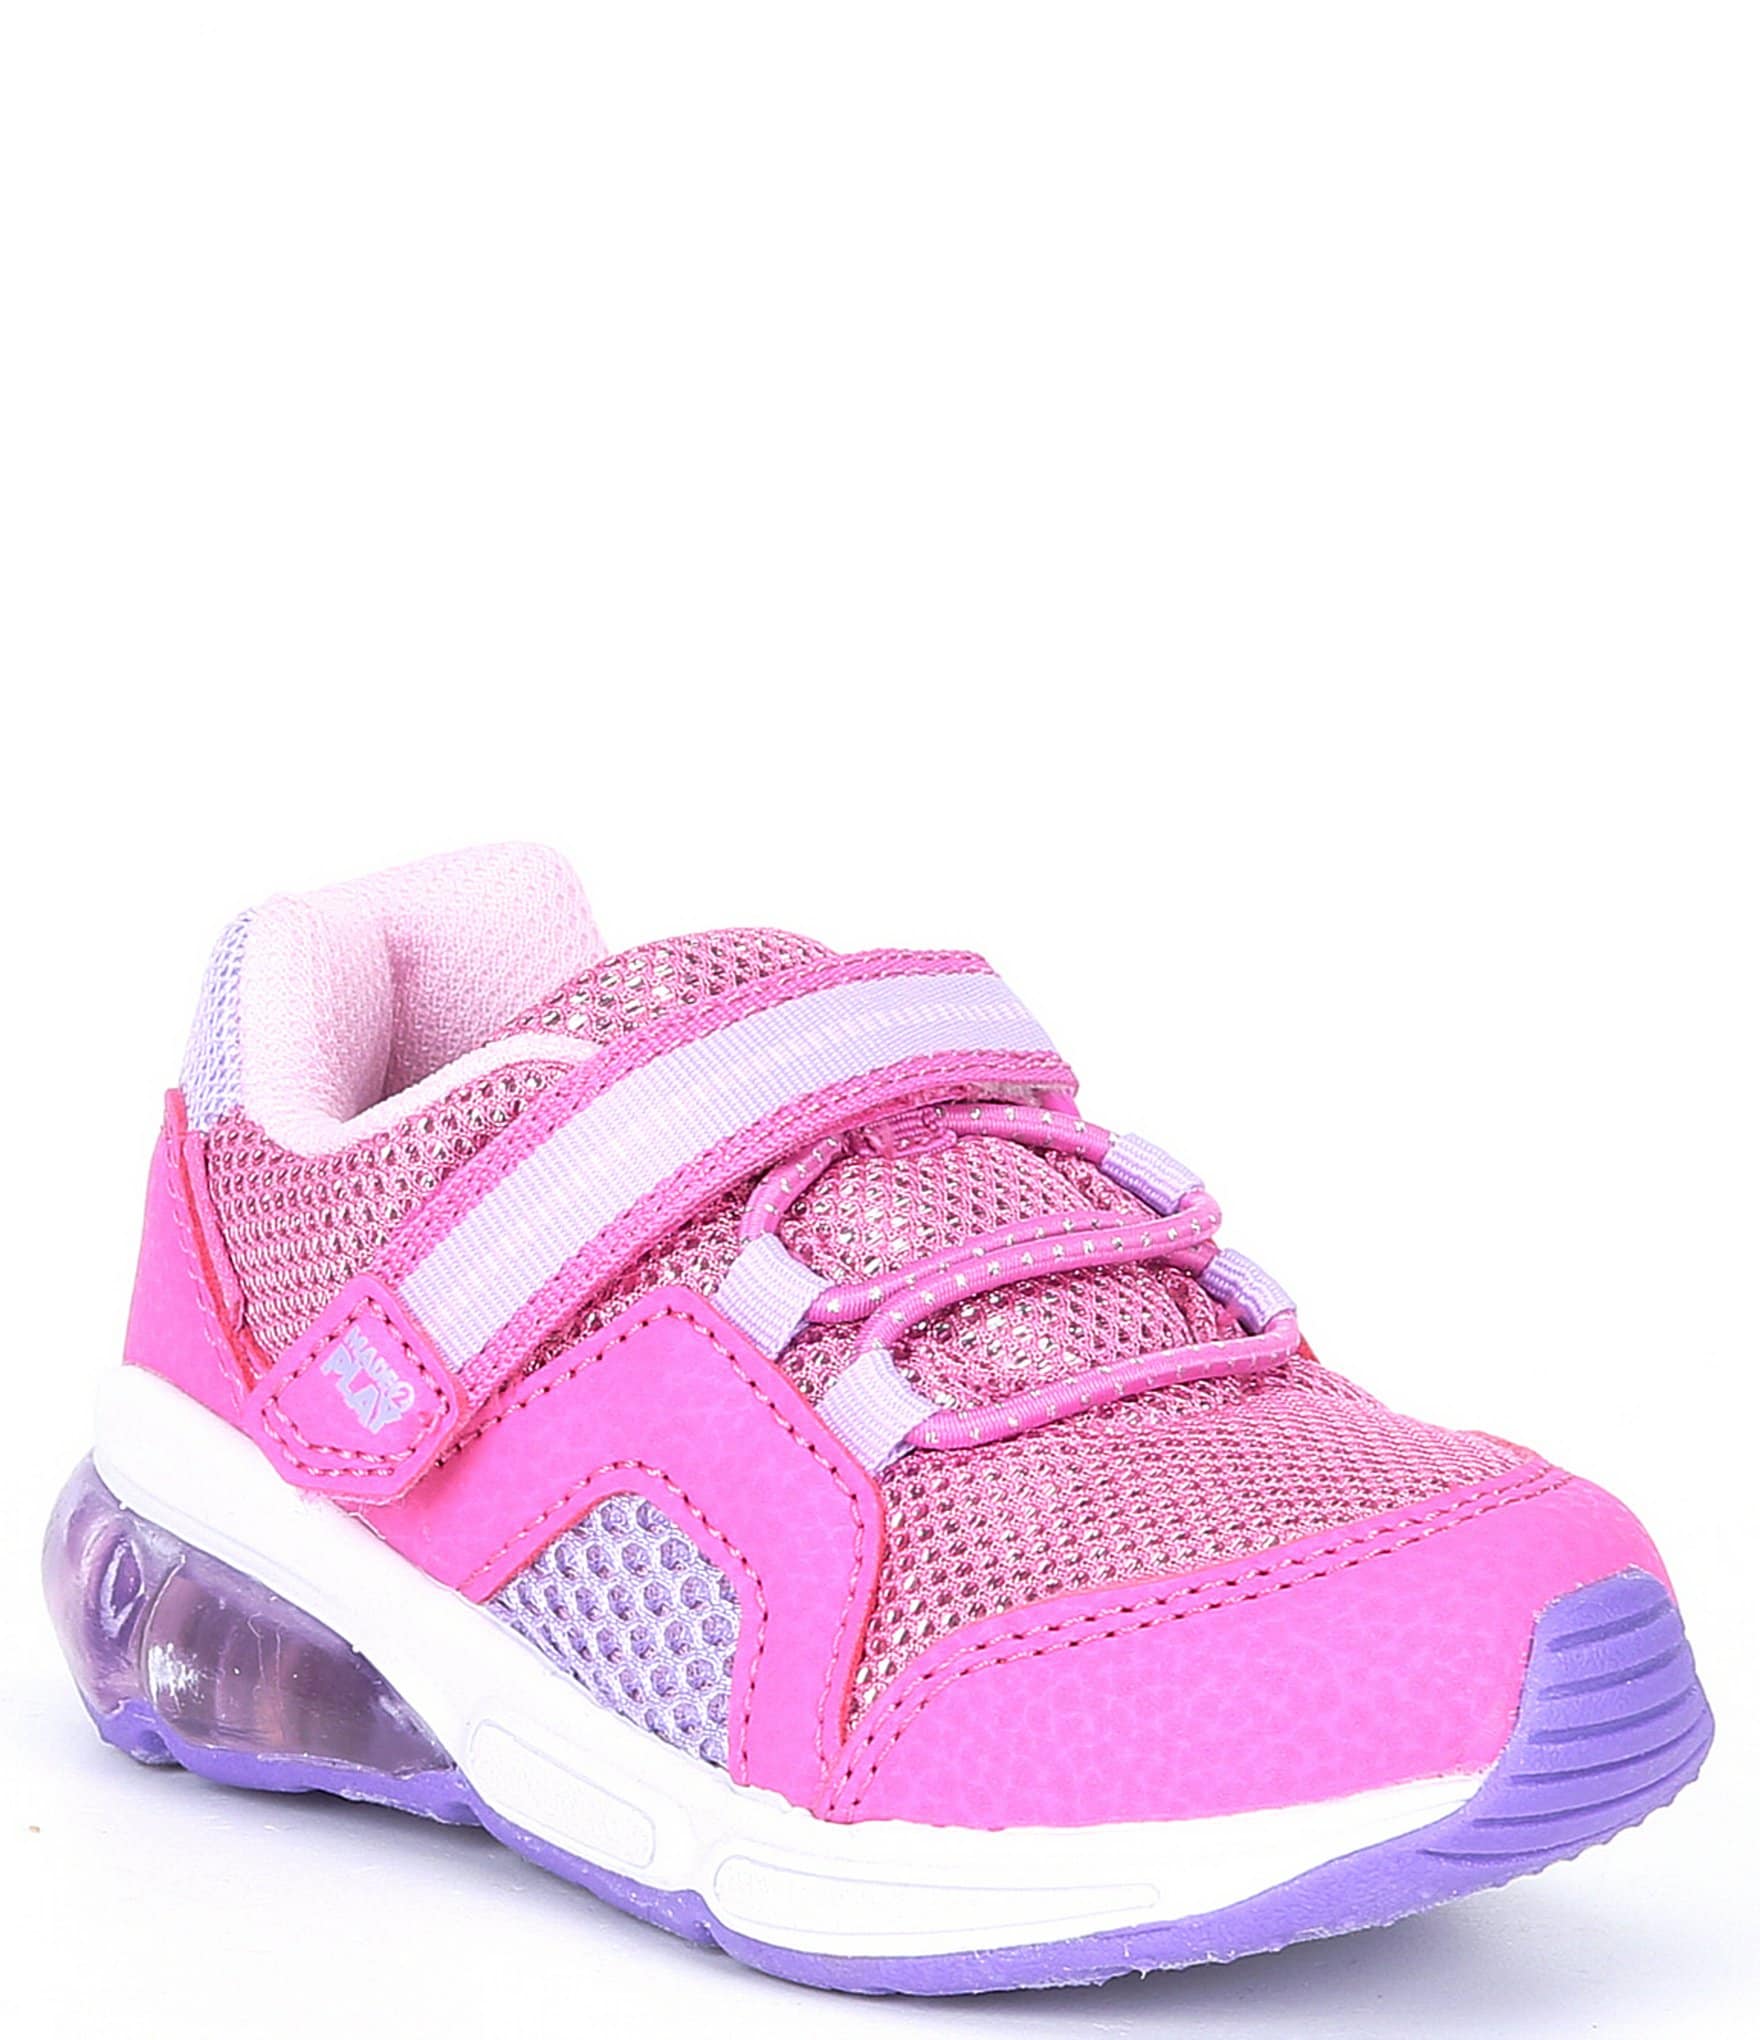 stride-rite-girls-lumi-bounce-made2play-washable-light-up-sneakers